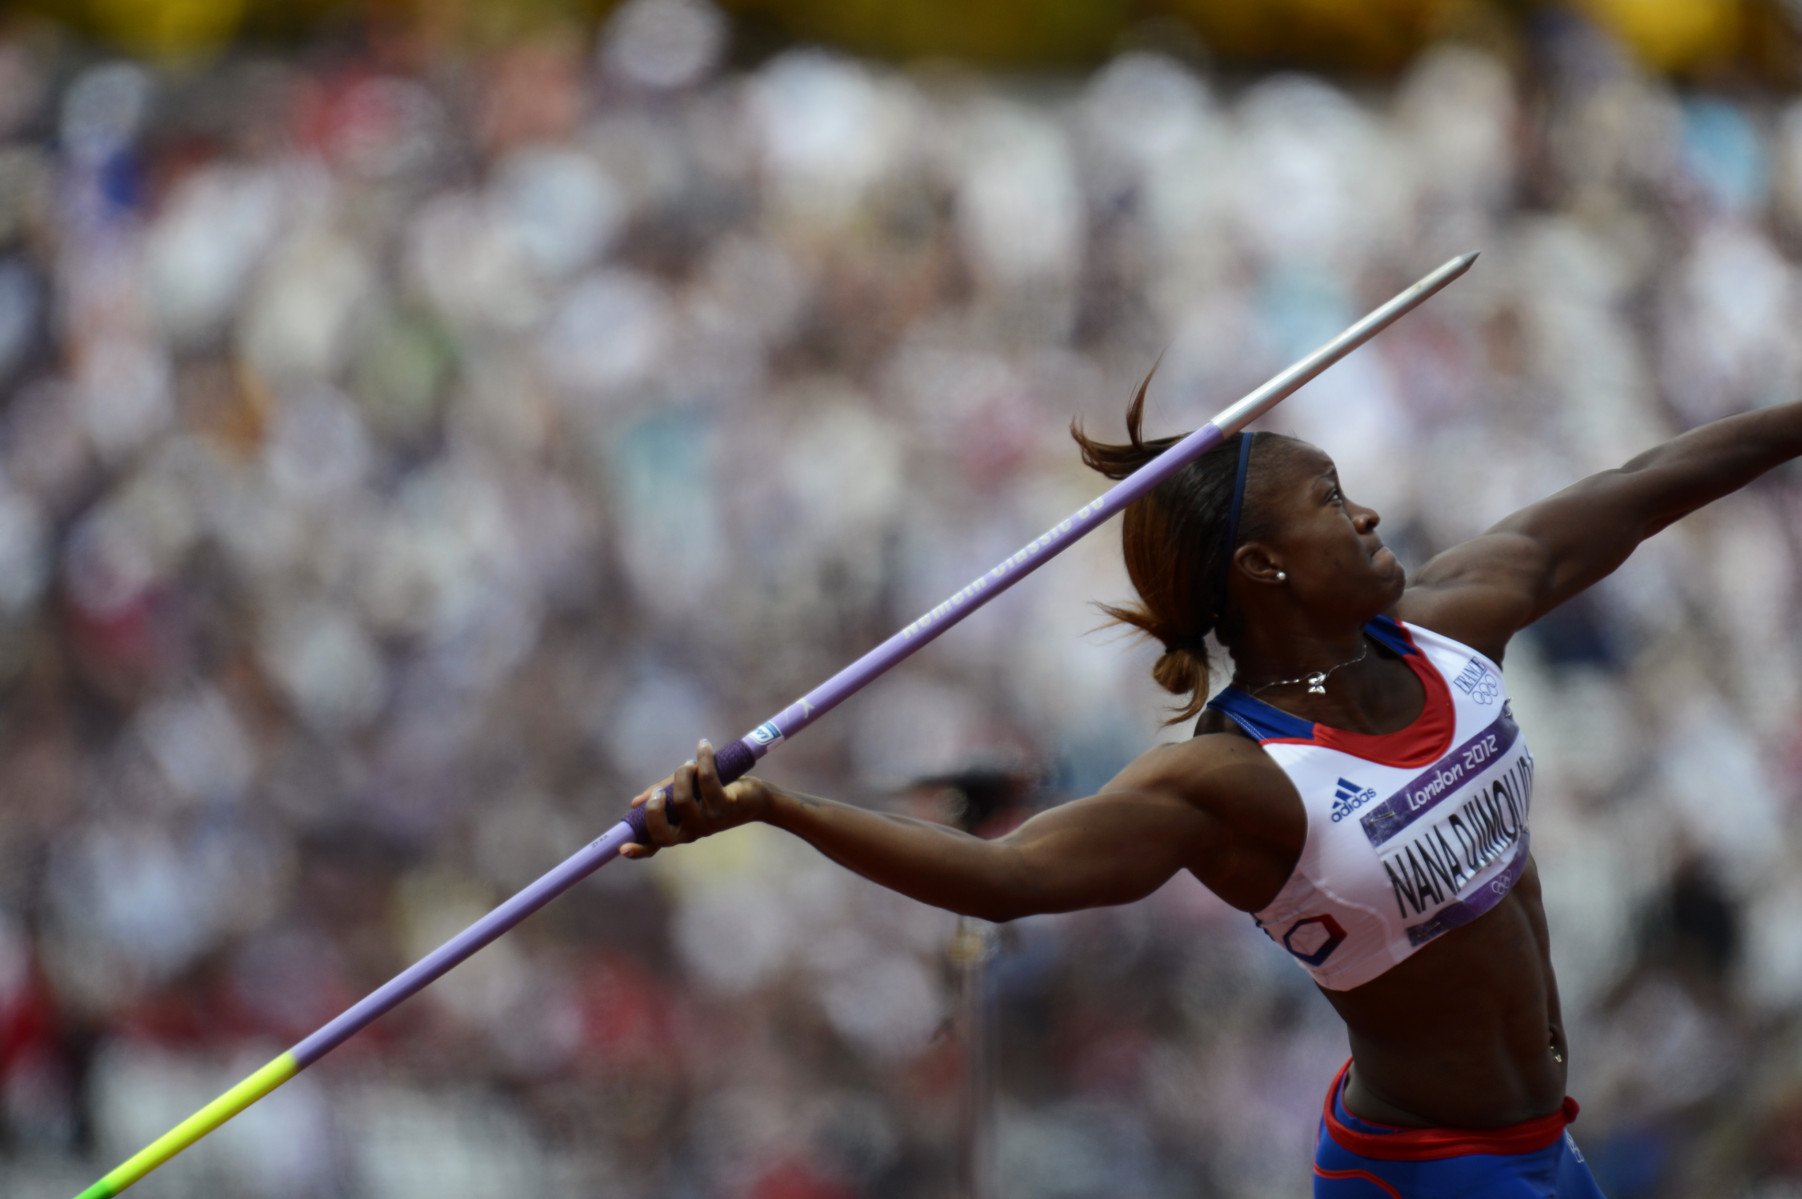 Antoinette Nana Djimou Ida of France throwing the javelin during the Heptathlon competition at the London Olympics.  : London Olympics : Photography by Adam Stoltman: Sports Photography, The Arts, Portraiture, Travel, Photojournalism and Fine Art in New York